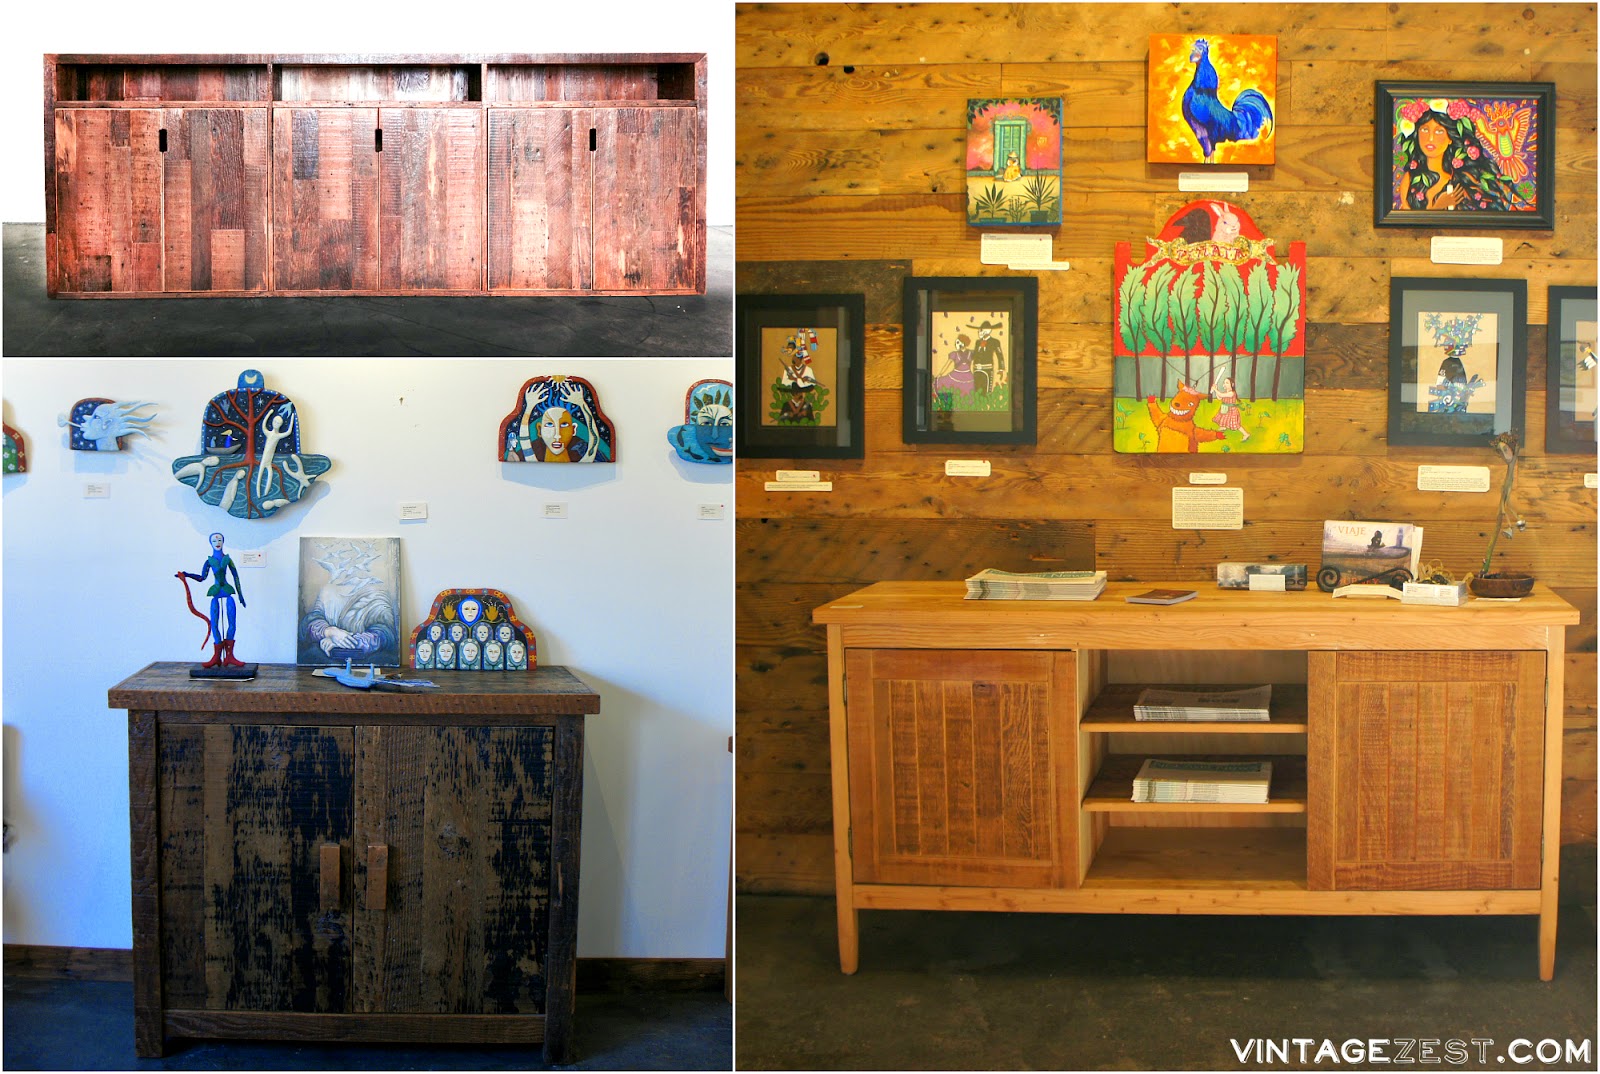 Treeline Woodworks feature & GIVEAWAY on Shop Small Saturday Showcase at Diane's Vintage Zest!